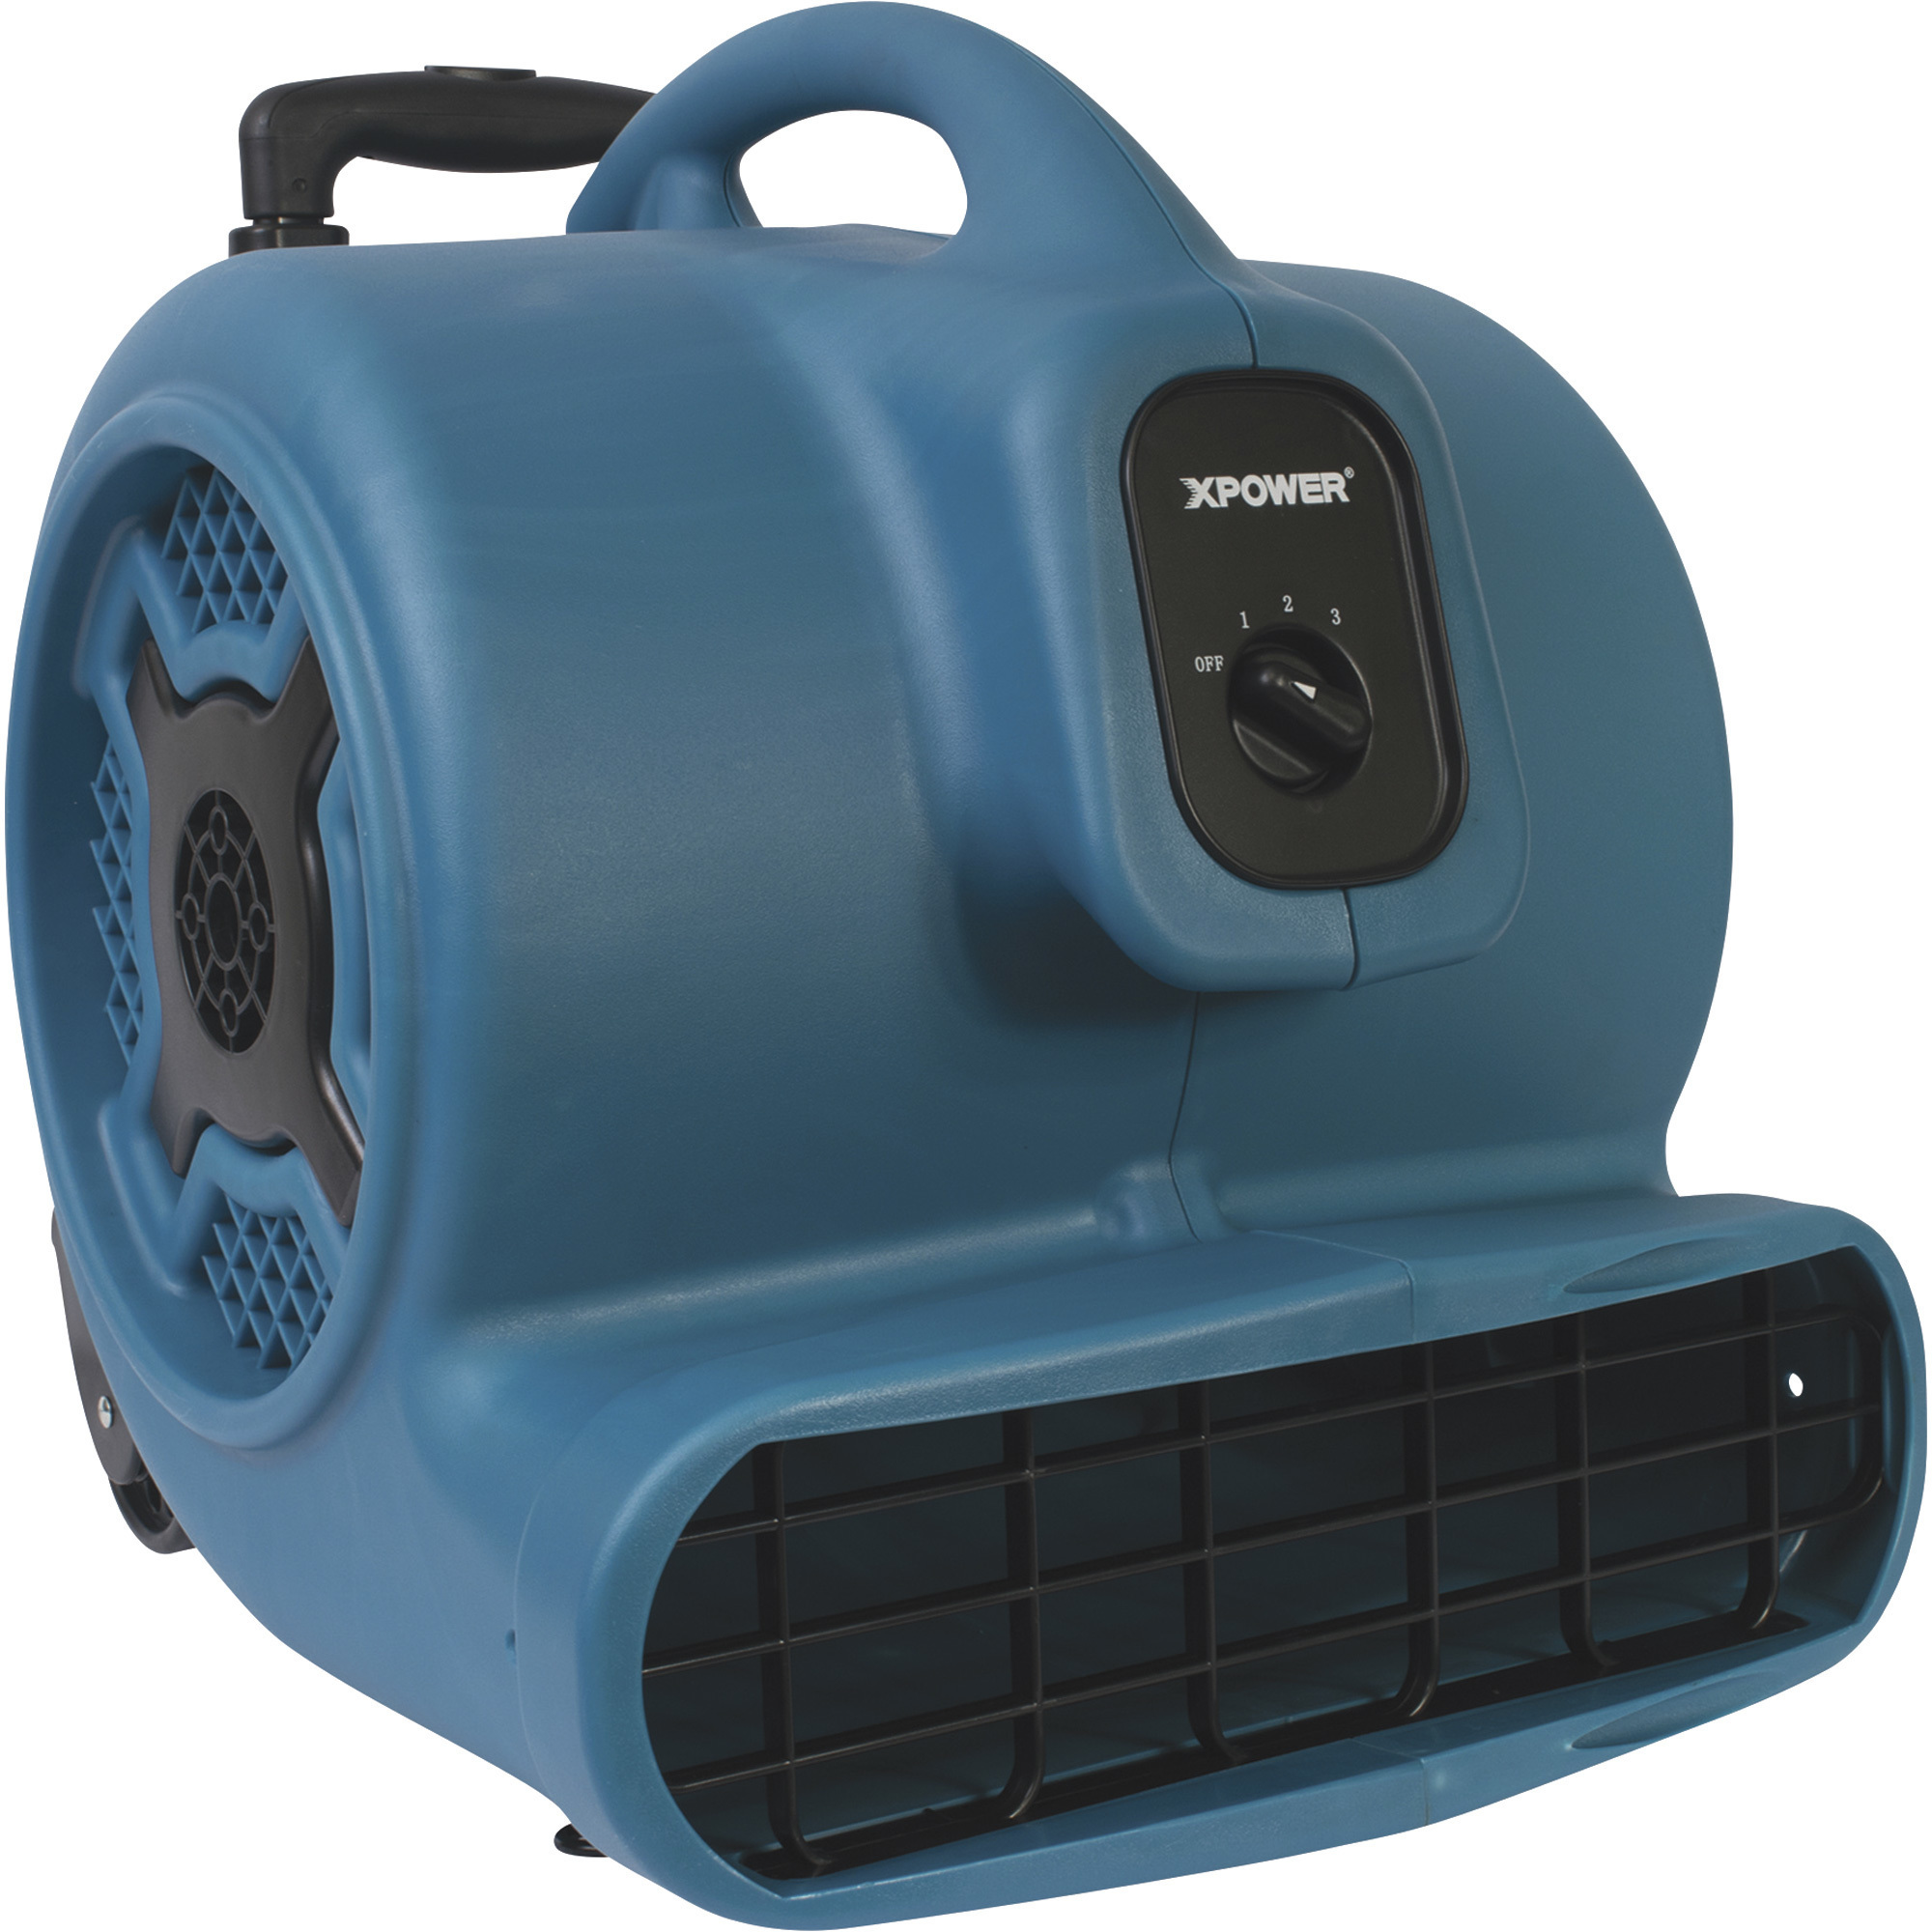 XPower 3/4 HP Air Mover/Dryer with Wheels, Xactimate Code WTRDRY, 3,200 CFM, Model P-800H-Blue